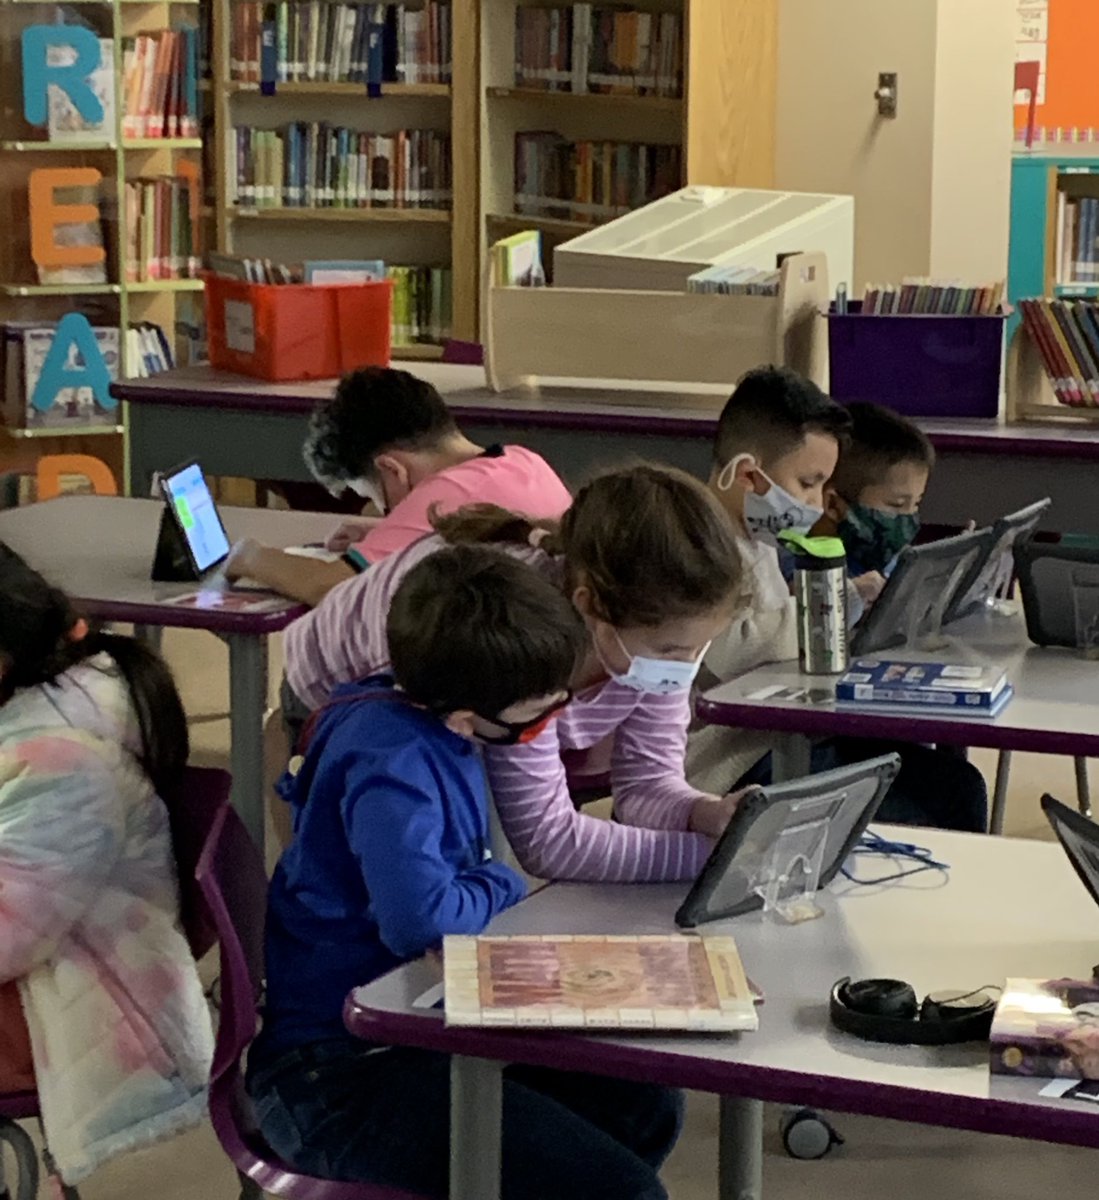 Another great day of coding, problem solving and teamwork @ChurchStreet_WP as we celebrate #csedweek #HourOfCode in the library #cseverywhere @WPTigerTech